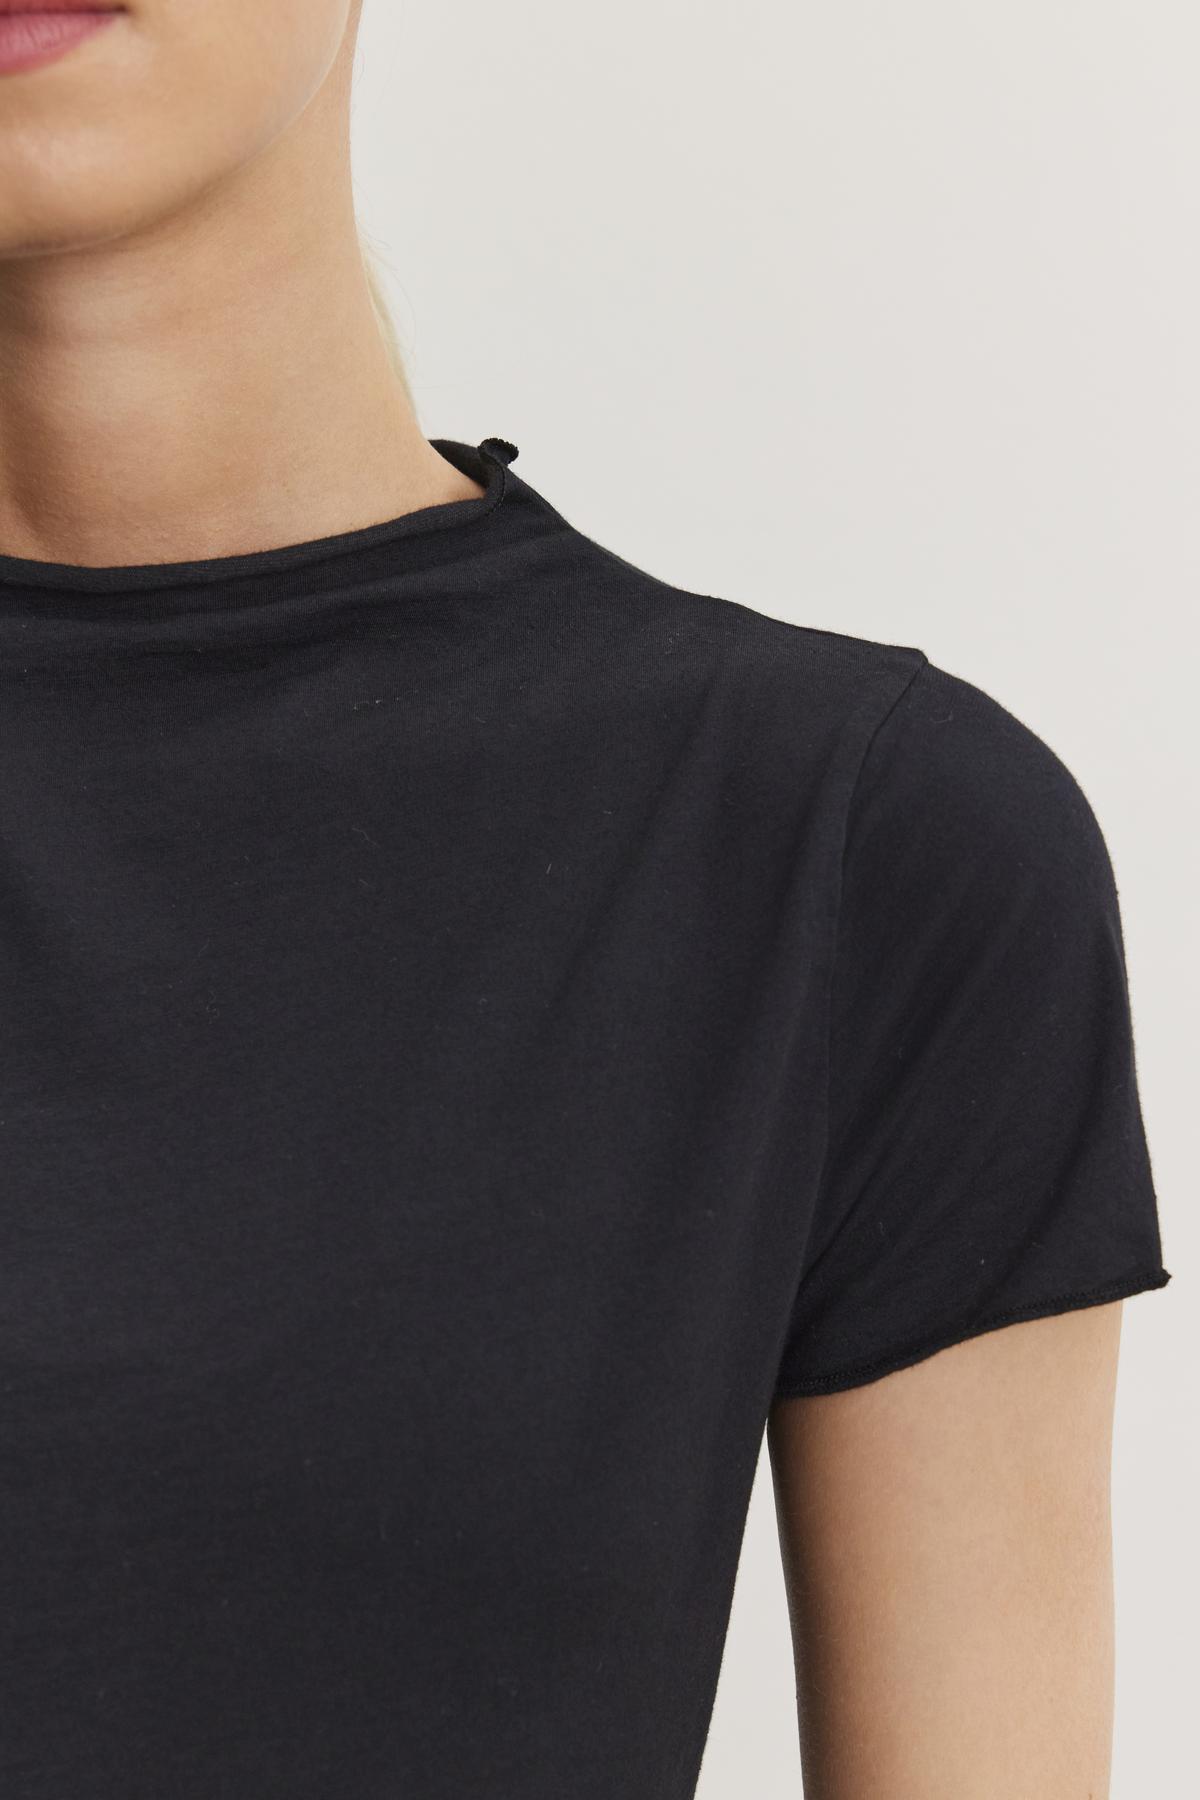 Close-up of a person wearing a fitted cropped silhouette black JACKIE MOCK NECK TEE by Velvet by Graham & Spencer. The photo shows the upper torso and partial face against a plain white background.-37104257892545